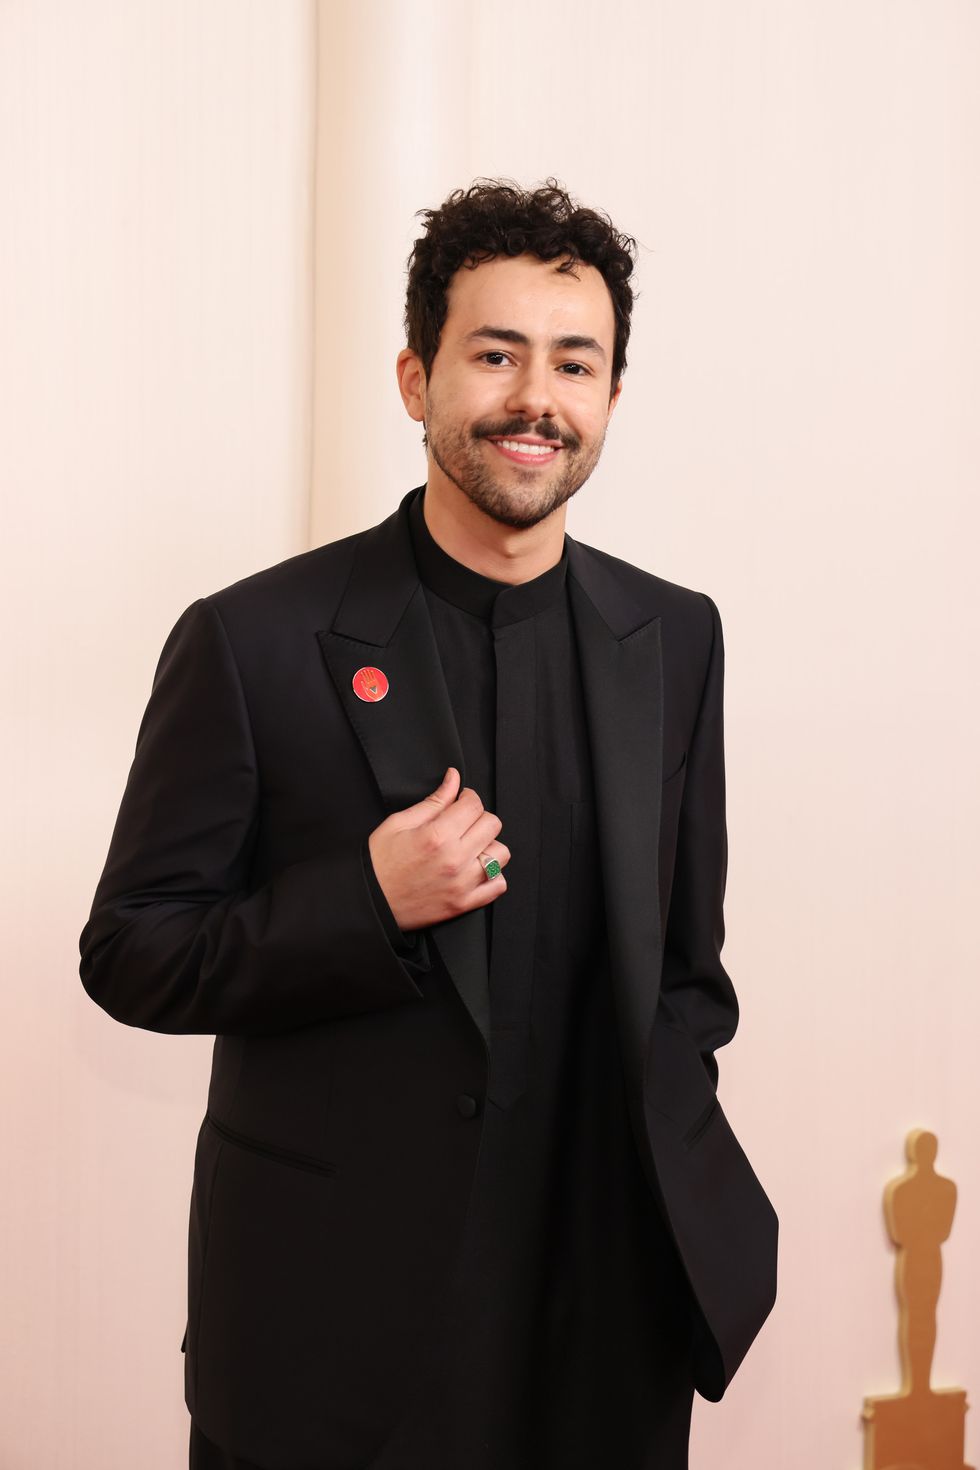 Poor Things star Ramy Youssef explains wearing a red pin at the Oscars